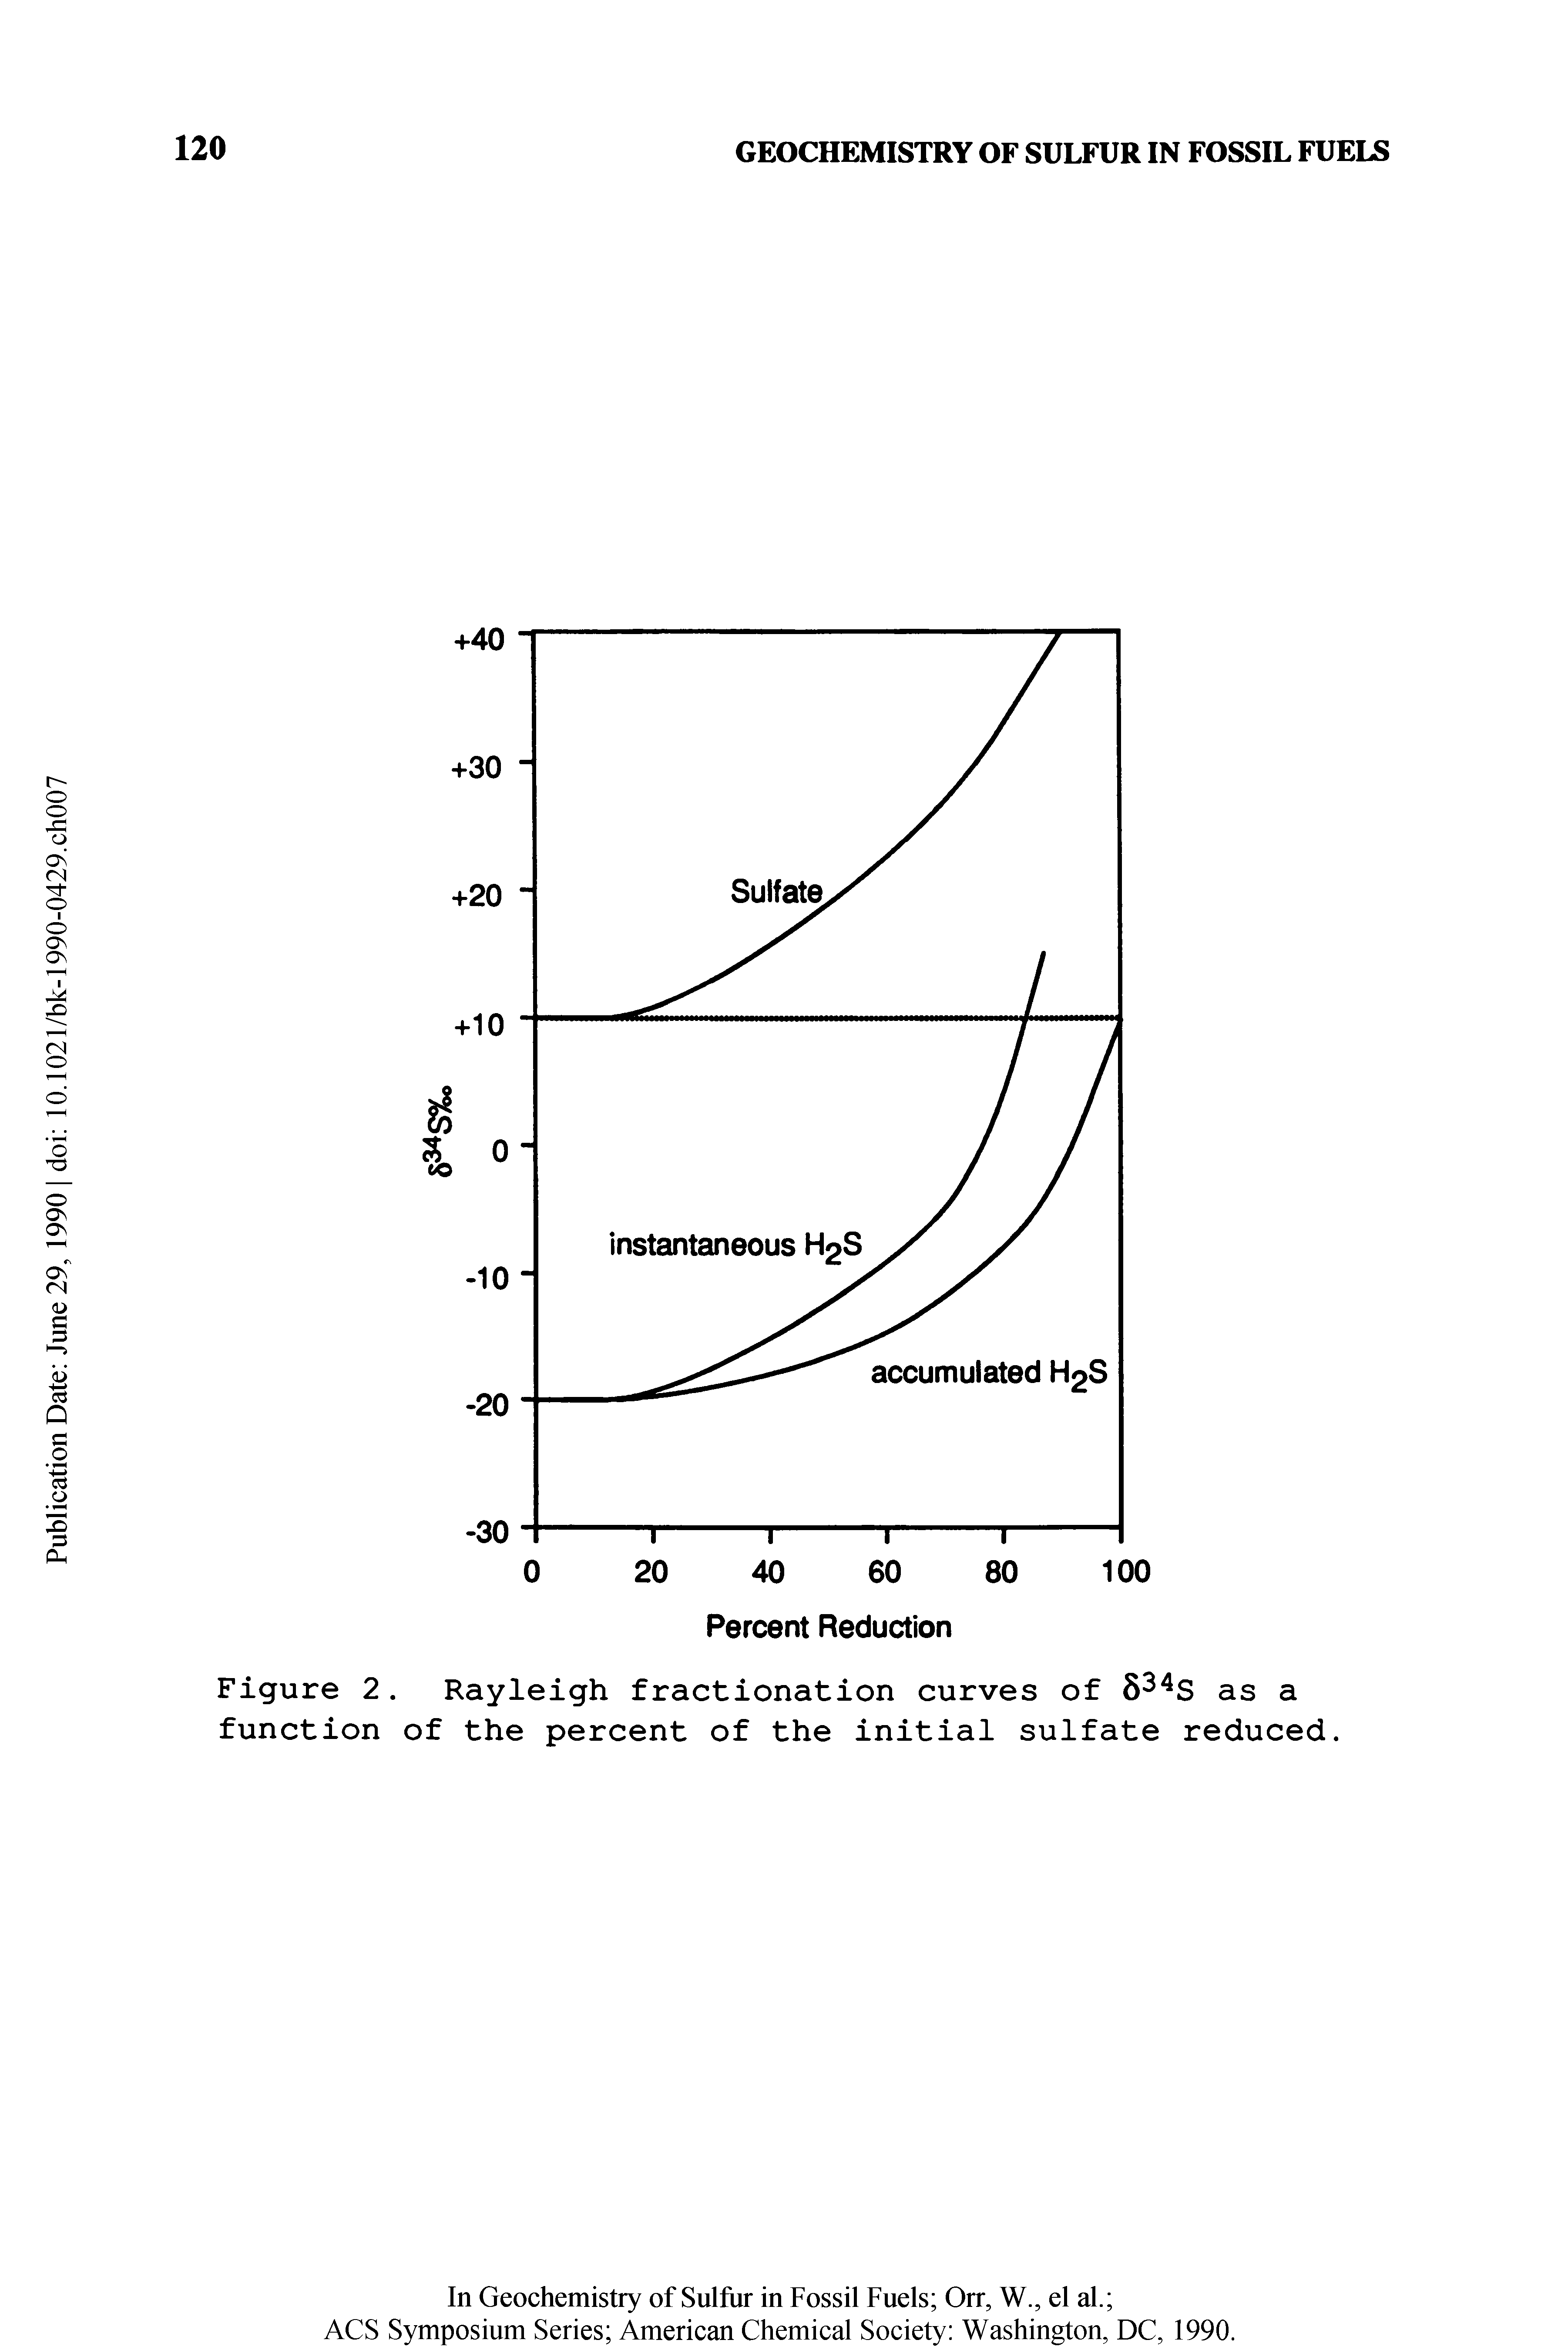 Figure 2. Rayleigh fractionation curves of 834S as a function of the percent of the initial sulfate reduced.